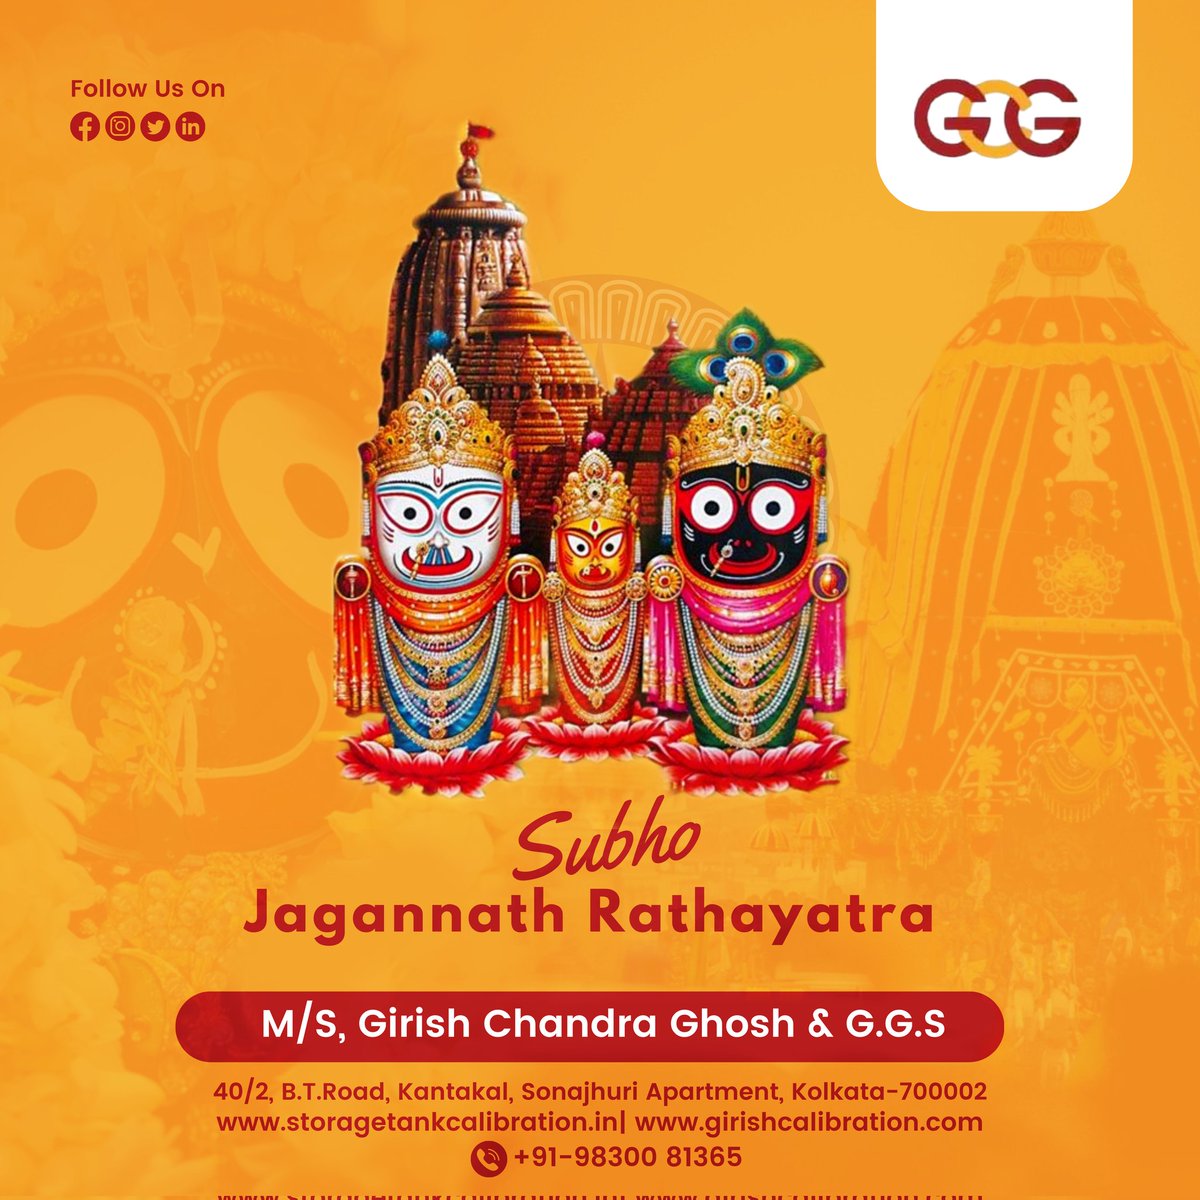 May the divine blessing of Lord Jagannath lead us towards a journey of prosperity, harmony and wellbeing. 
রথযাত্রার শুভ কামনা সবাইকে

#RathYatra #rathajatra2023 #rathyatra #goodwishes #goodwishestoal